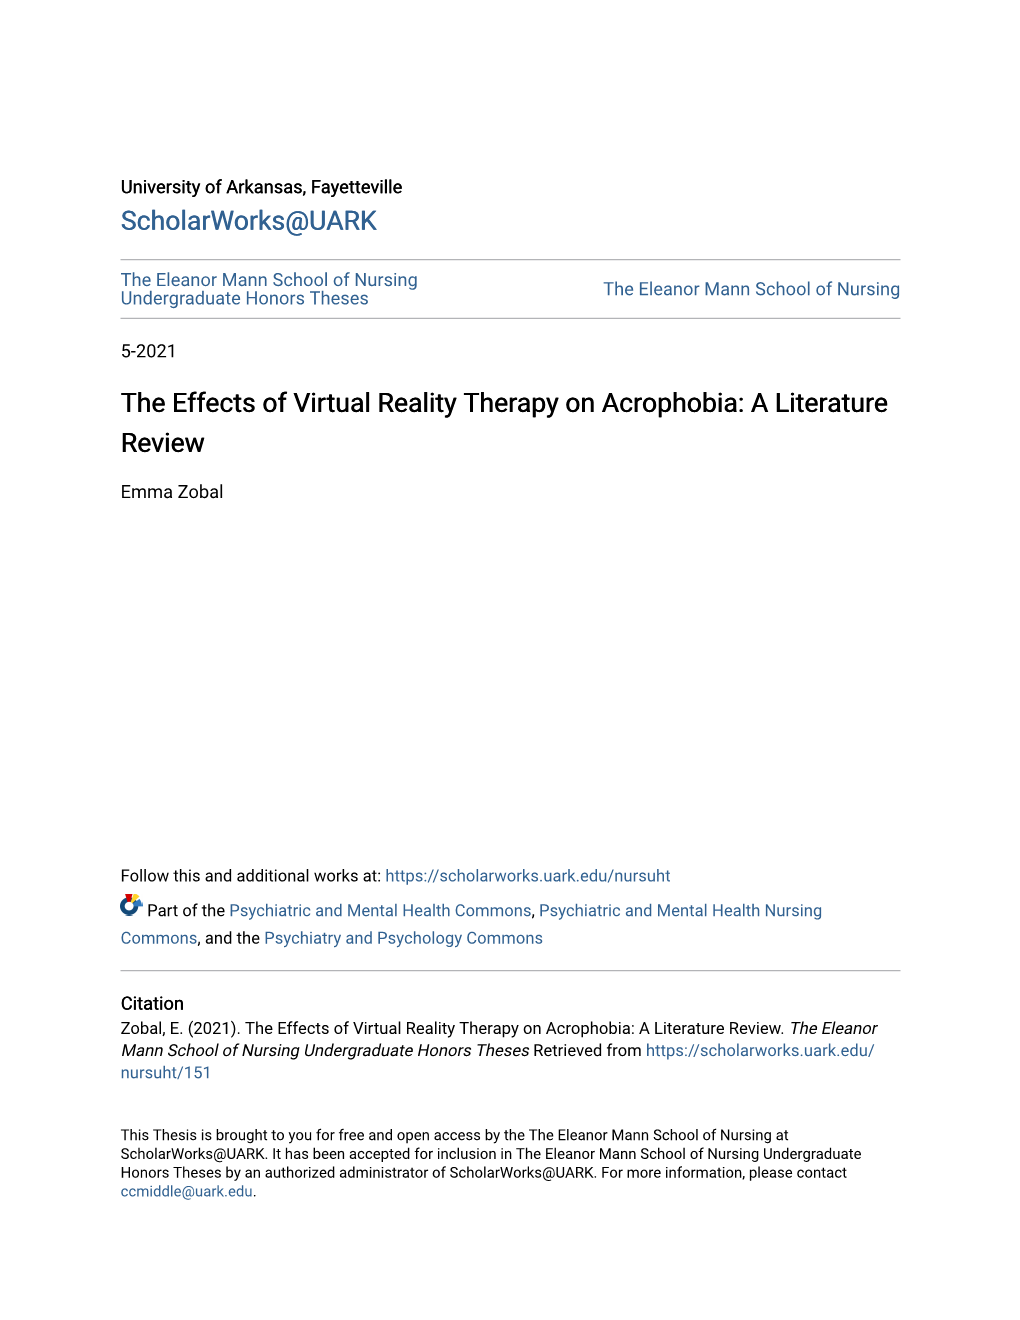 The Effects of Virtual Reality Therapy on Acrophobia: a Literature Review